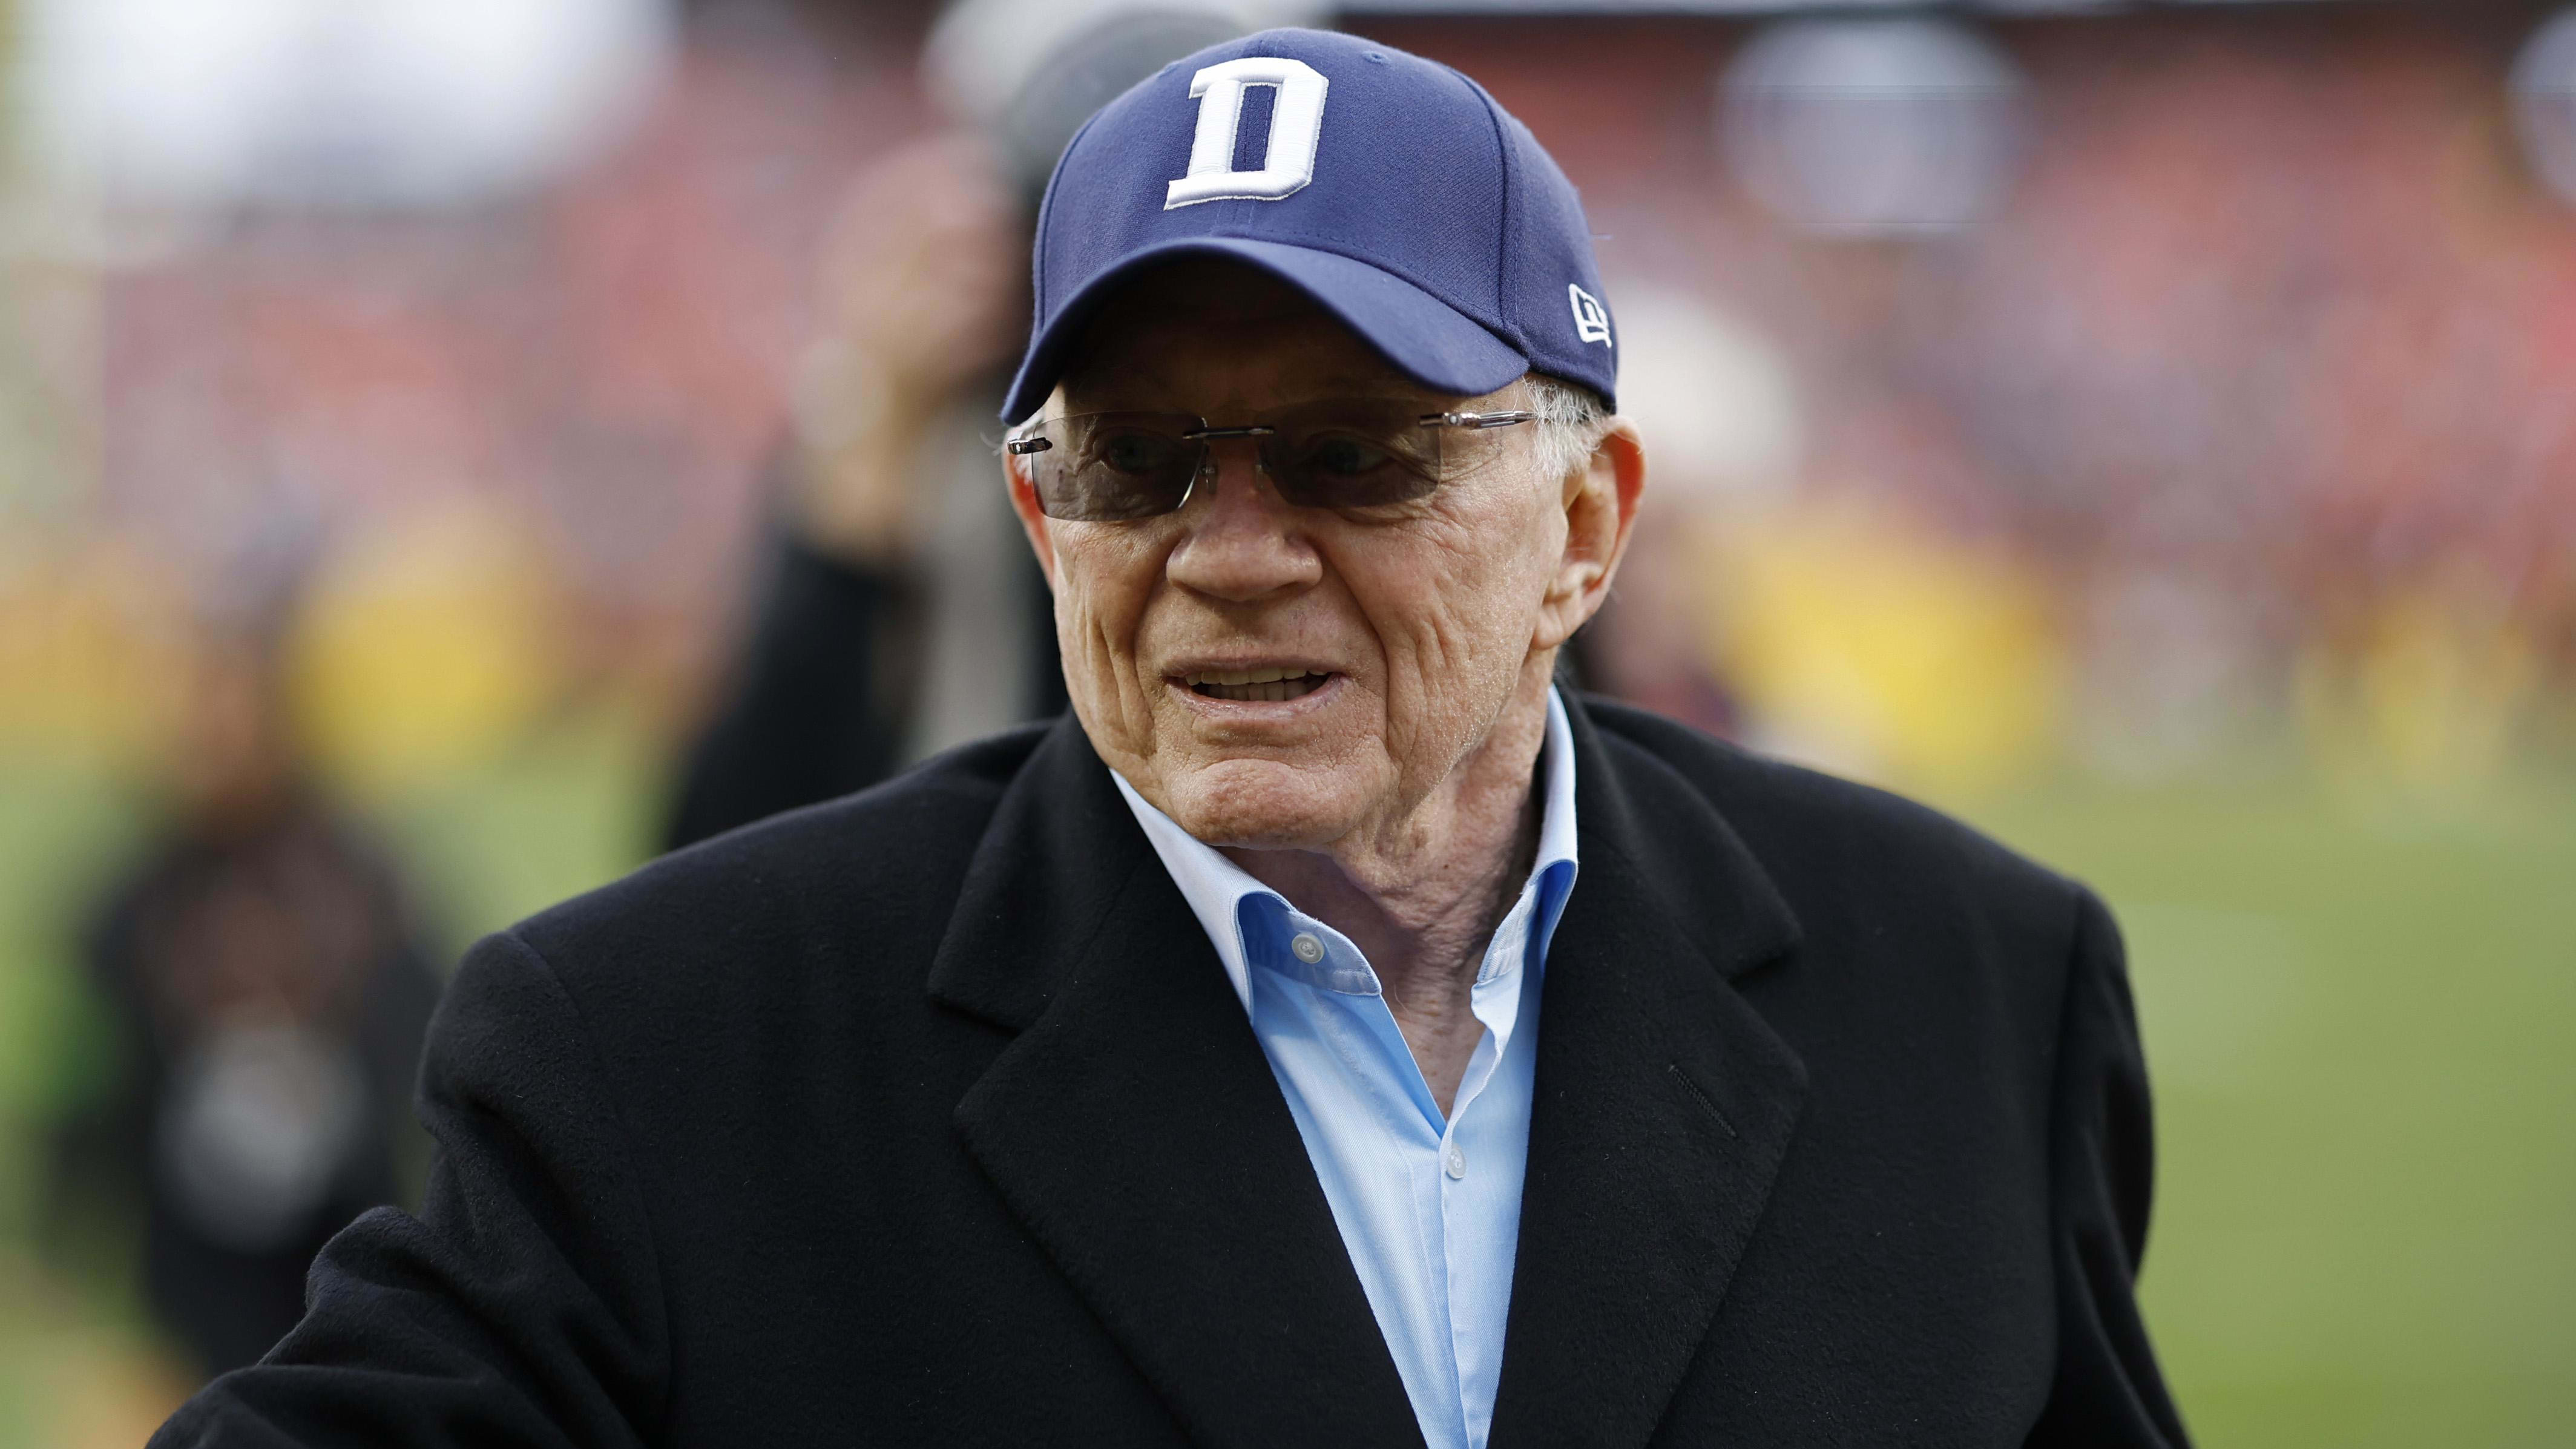 Jerry Jones of the Dallas Cowboys falls short of top spot on Forbes Richest People in Sports list